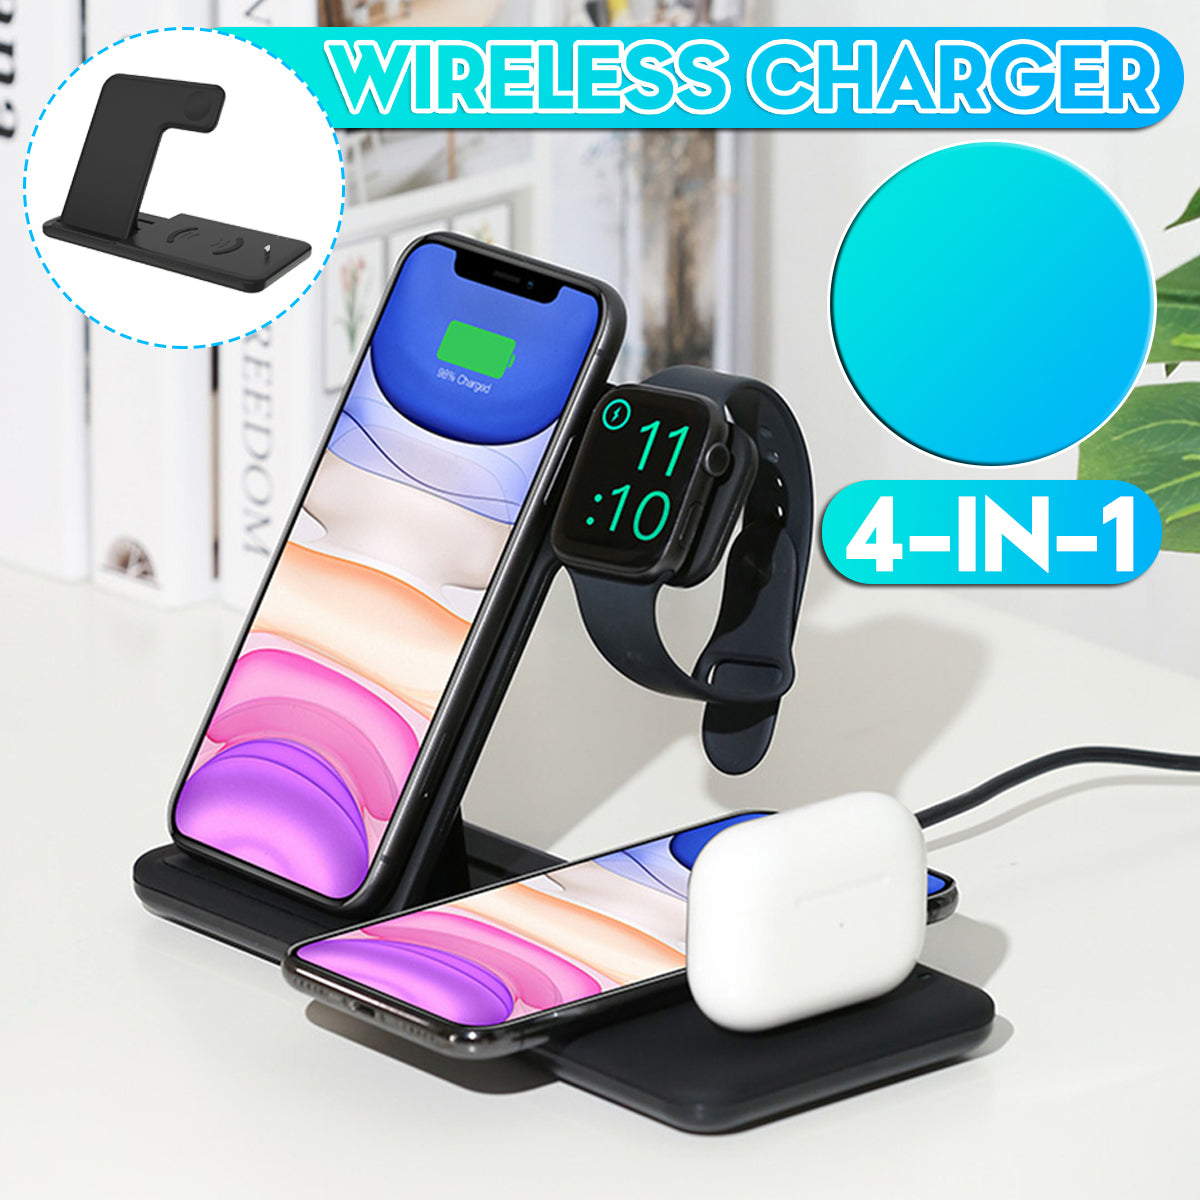 Bakeey 4 in 1 Foldable 15W Qi Fast Wireless Charger Stand Dock Station for Airpods Pro iWatch for iPhone 12 Pro Max for Samsung Galaxy Note S20 ultra for Huawei Mate40